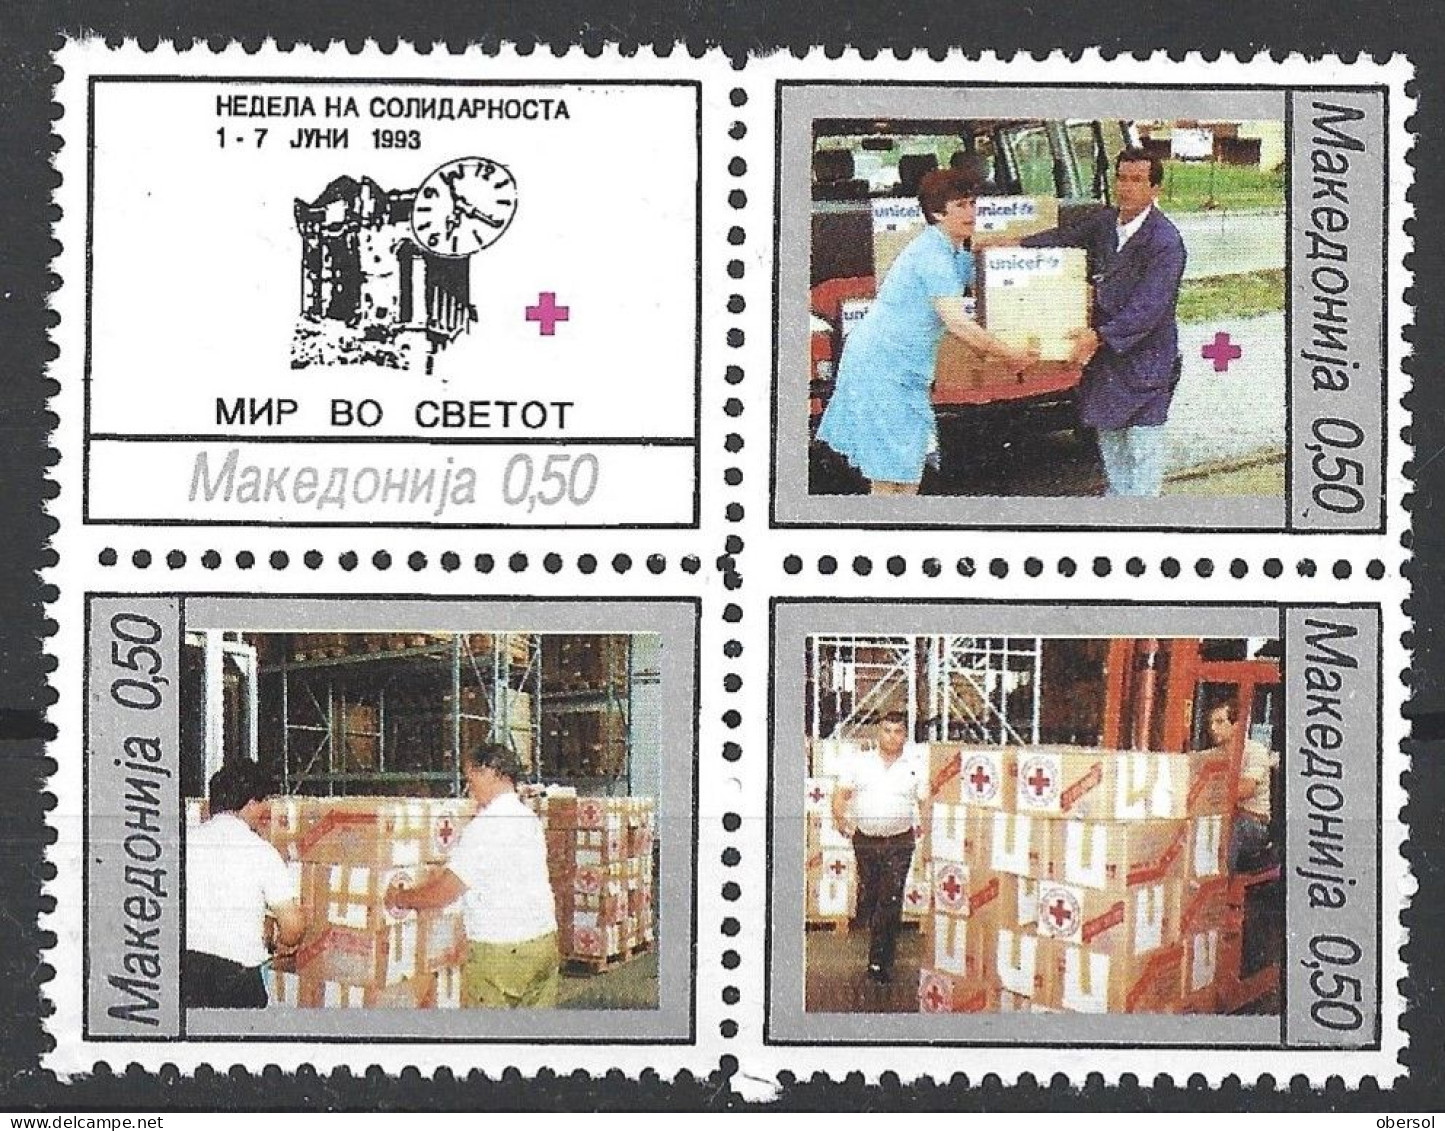 Macedonia 1993 Red Cross Solidarity Complete Block Of Four MNH (2) - Nordmazedonien